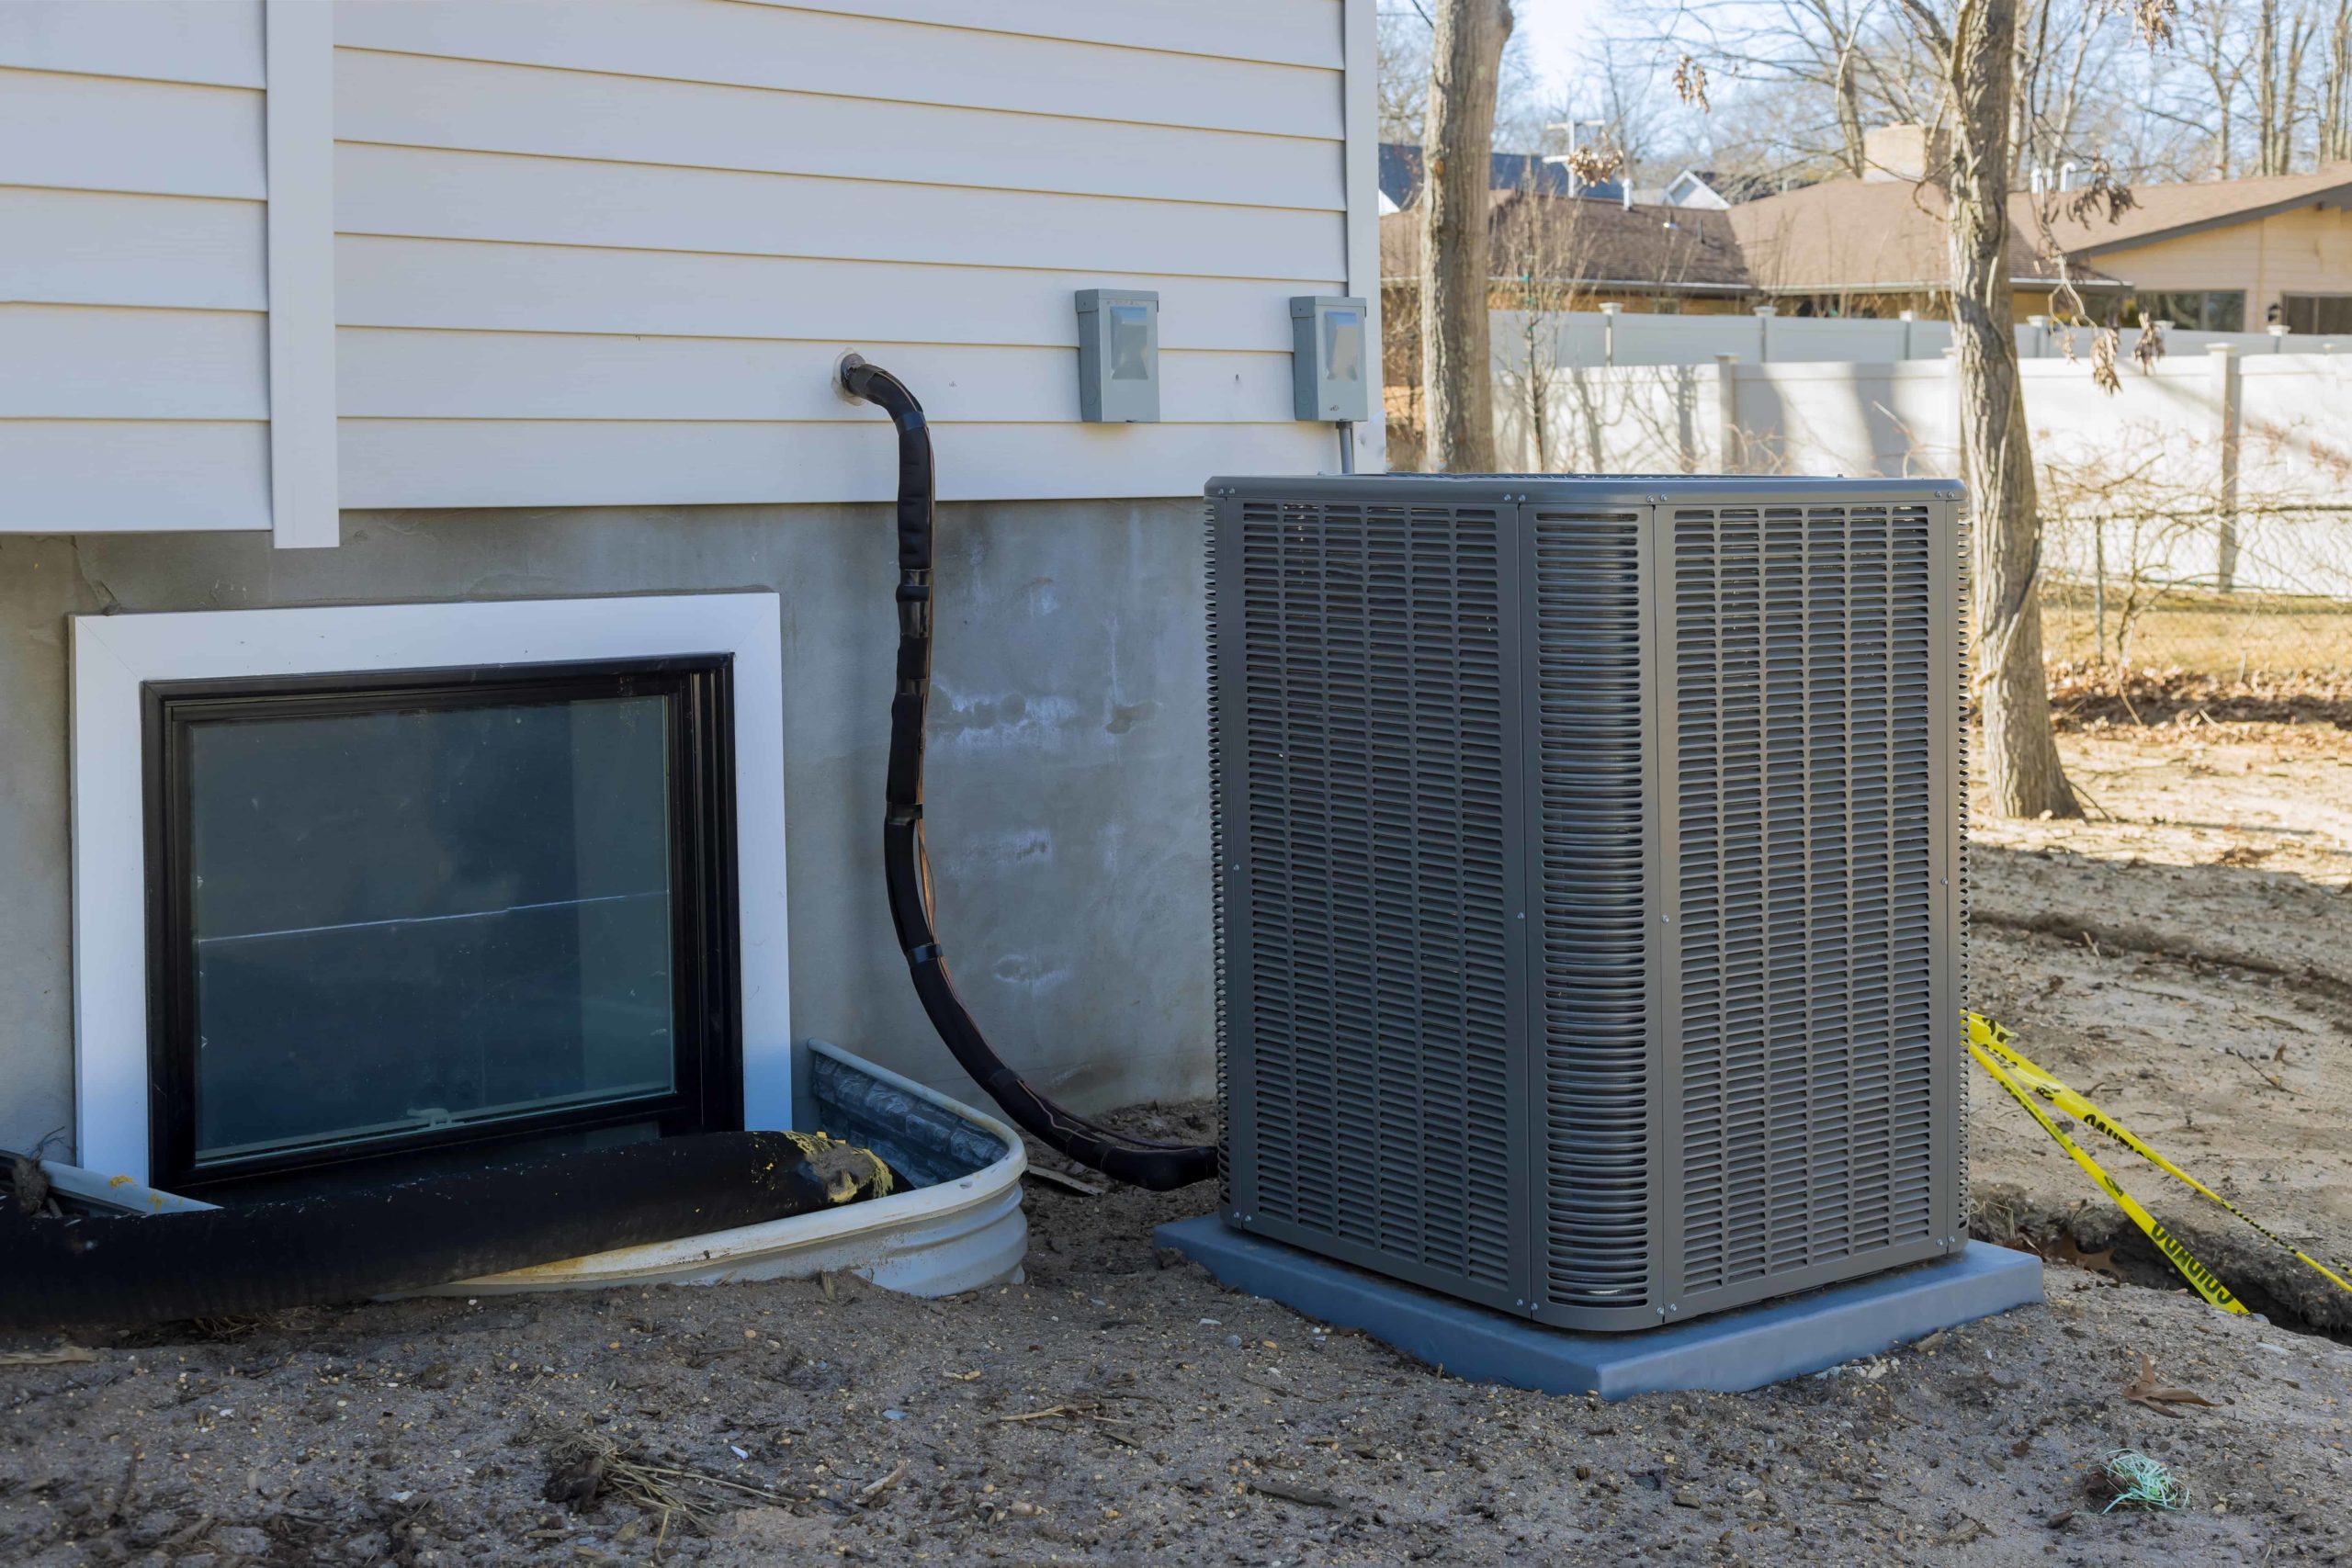 Photo: Smaller system that will have lower HVAC replacement costs